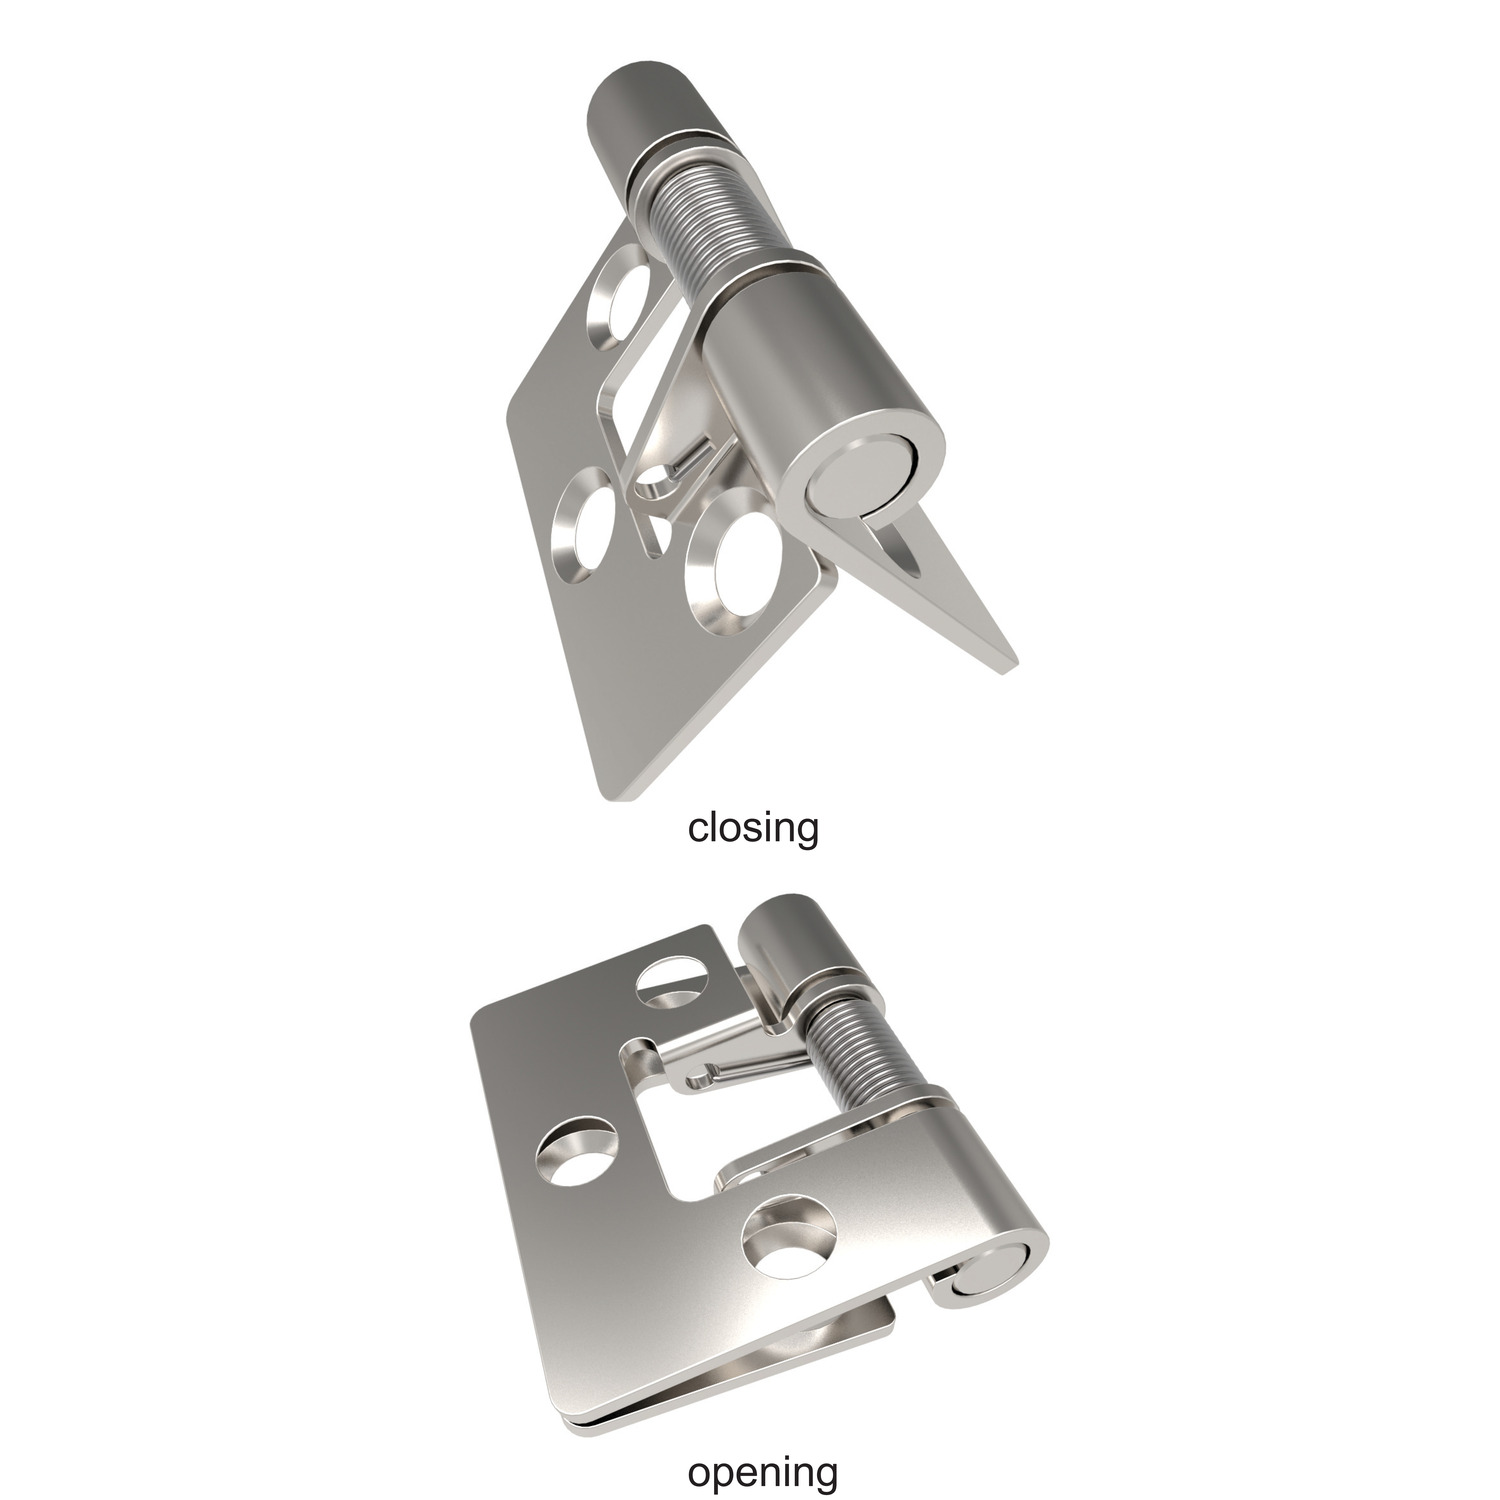 S4200.AC0020 Spring Hinges - High Tension - SS. Right - Closing - 41